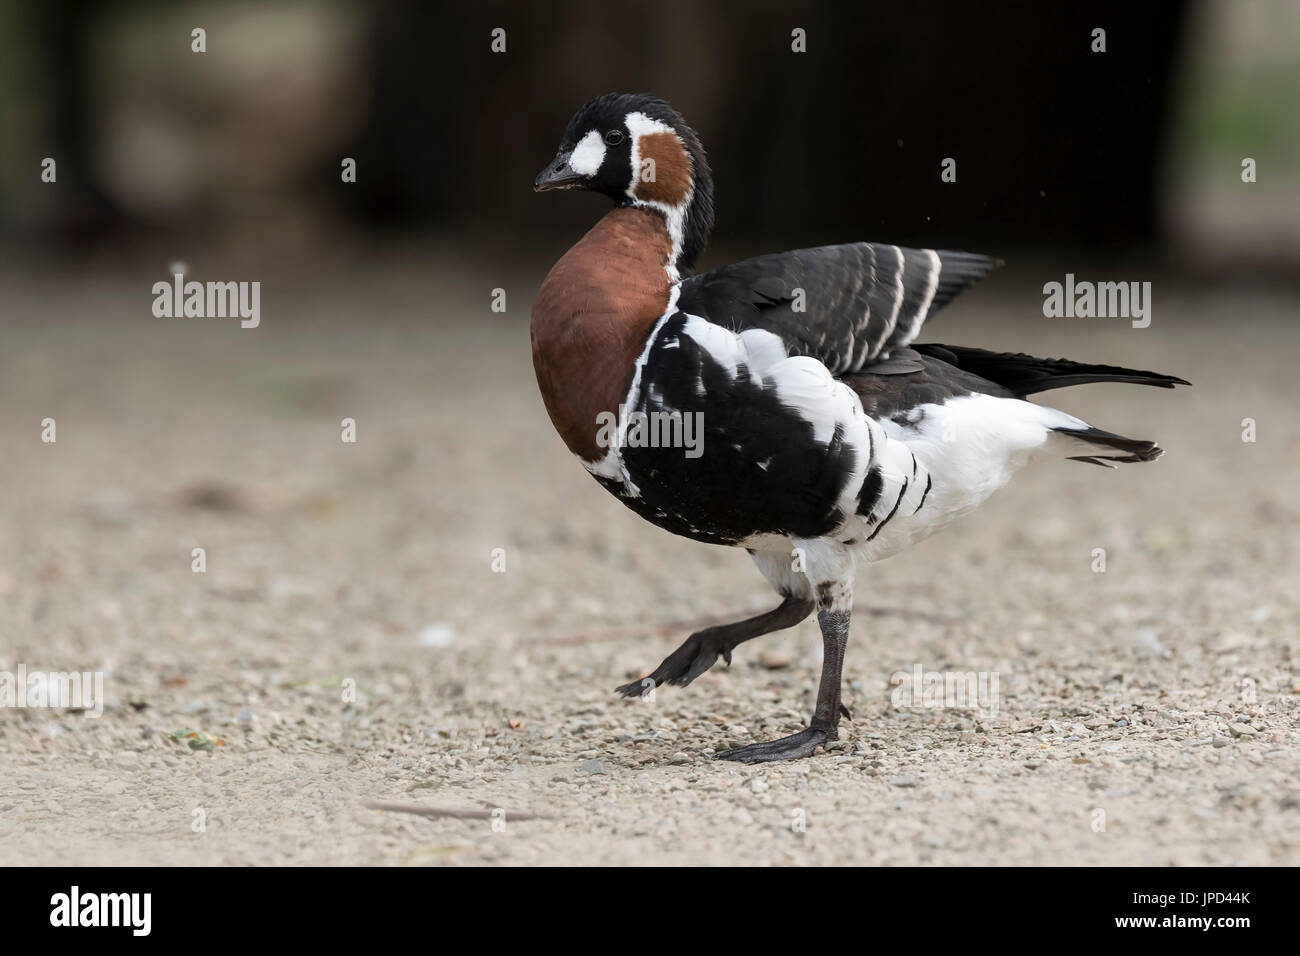 Closeup of a Red-breasted goose (Branta ruficollis) walking on gravel. Stock Photo